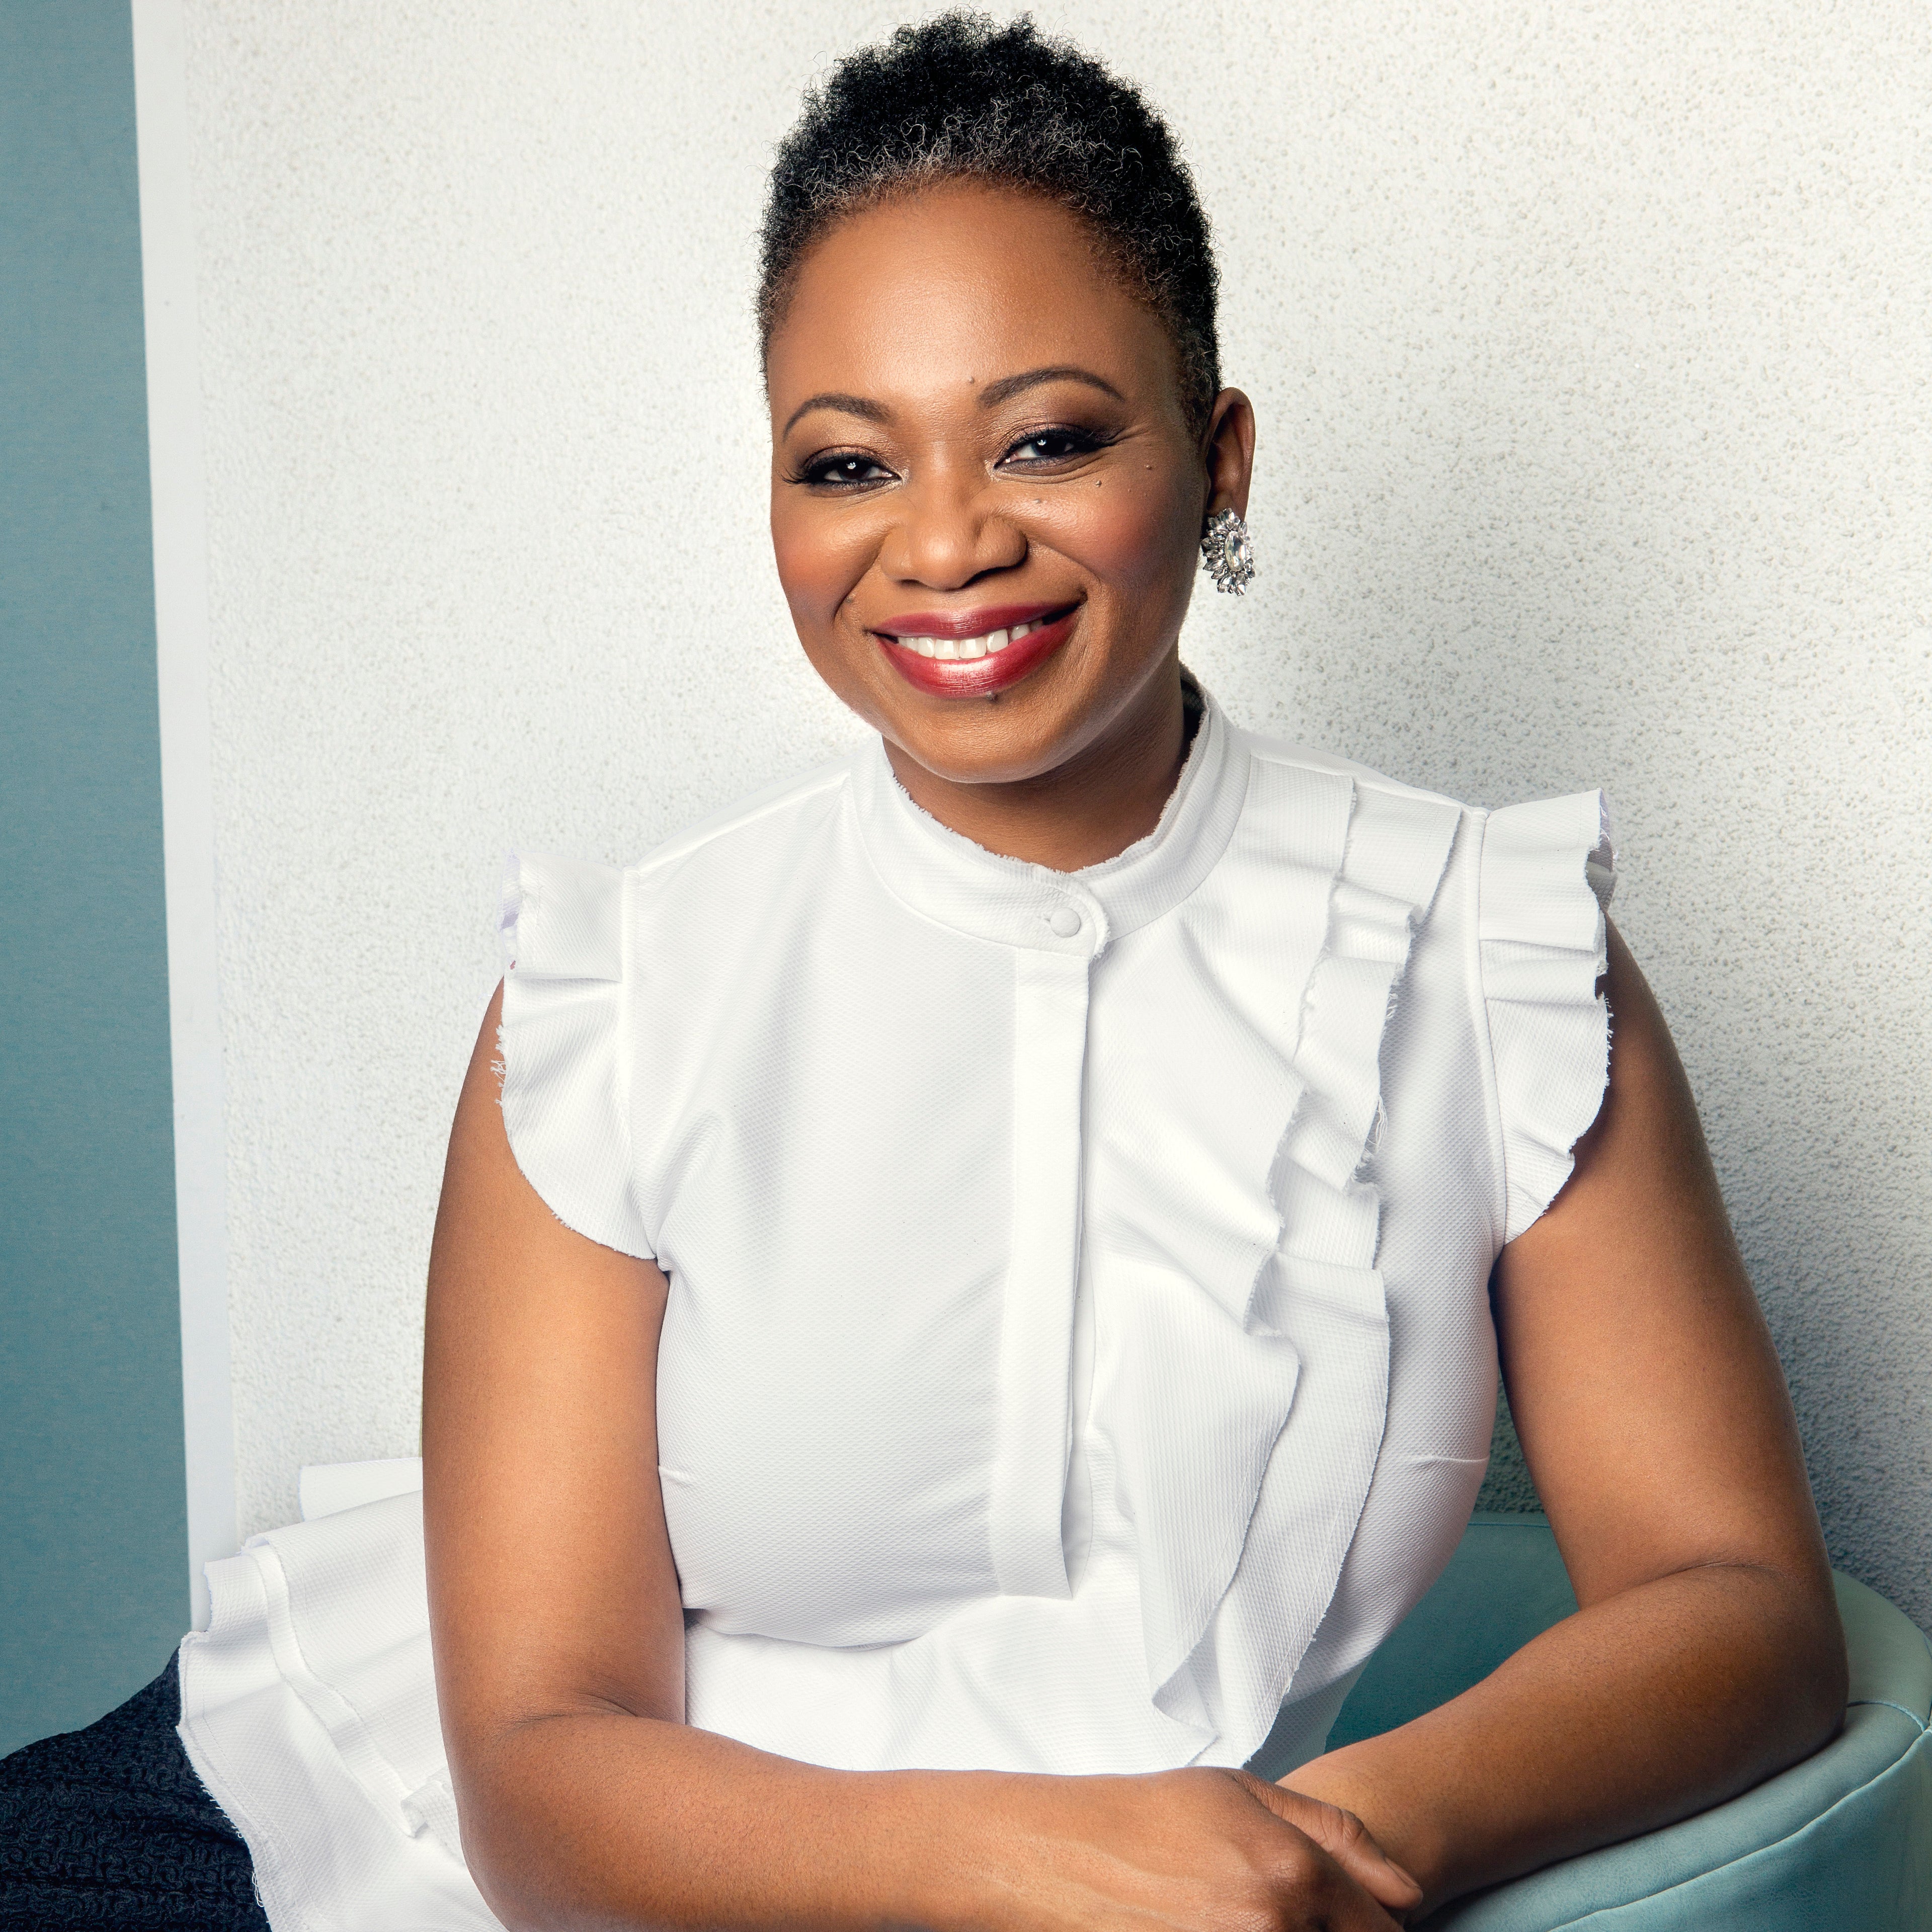 ESSENCE Editor In Chief Vanessa K. De Luca On How Everyone's Path To Their Destiny Is Different 
